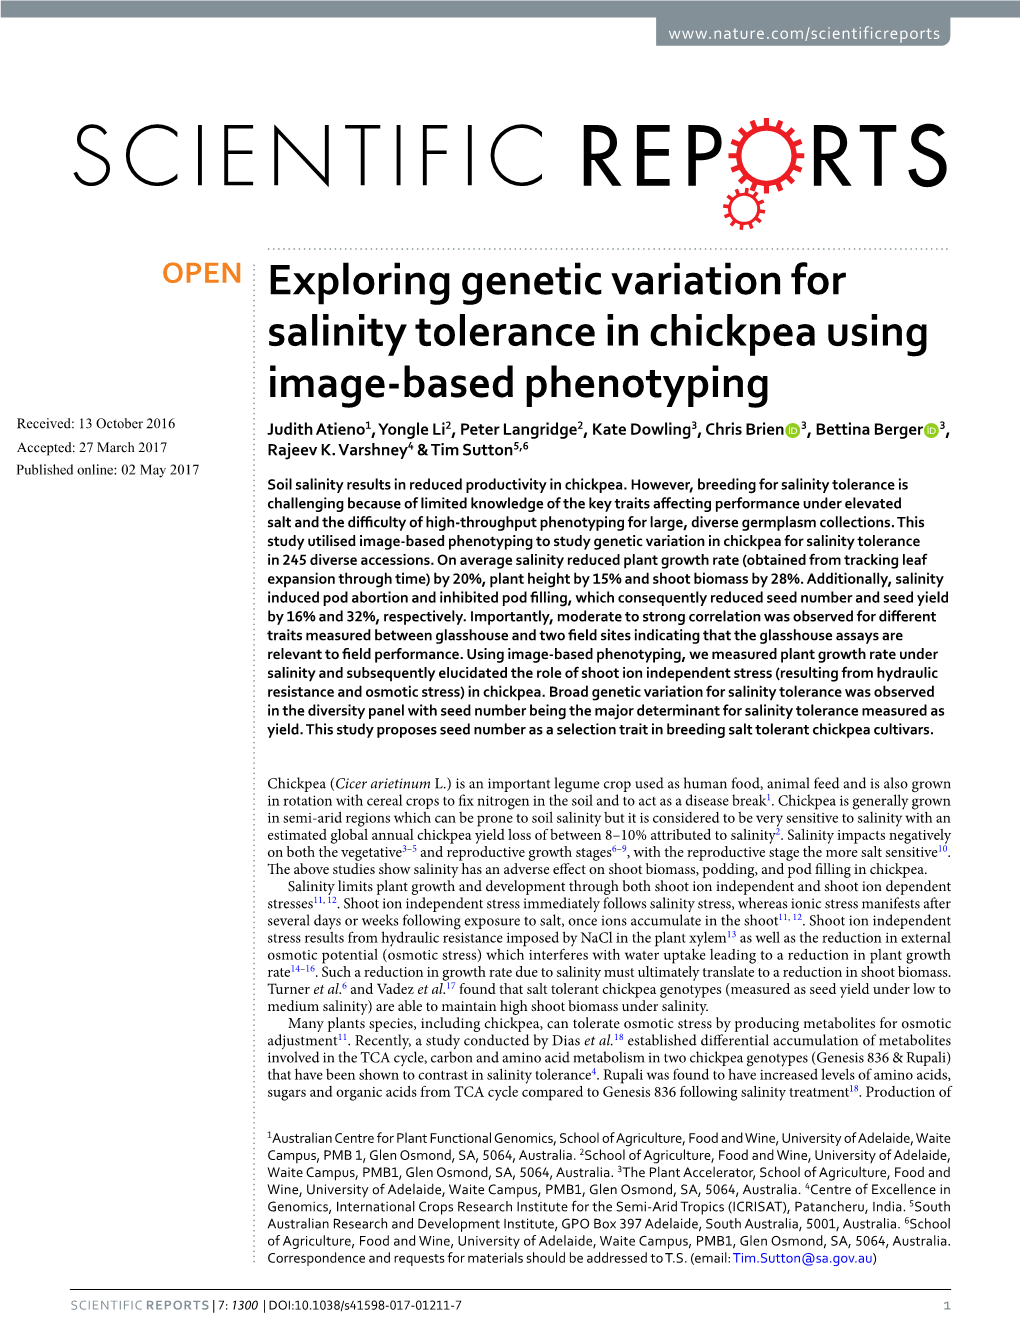 Exploring Genetic Variation for Salinity Tolerance in Chickpea Using